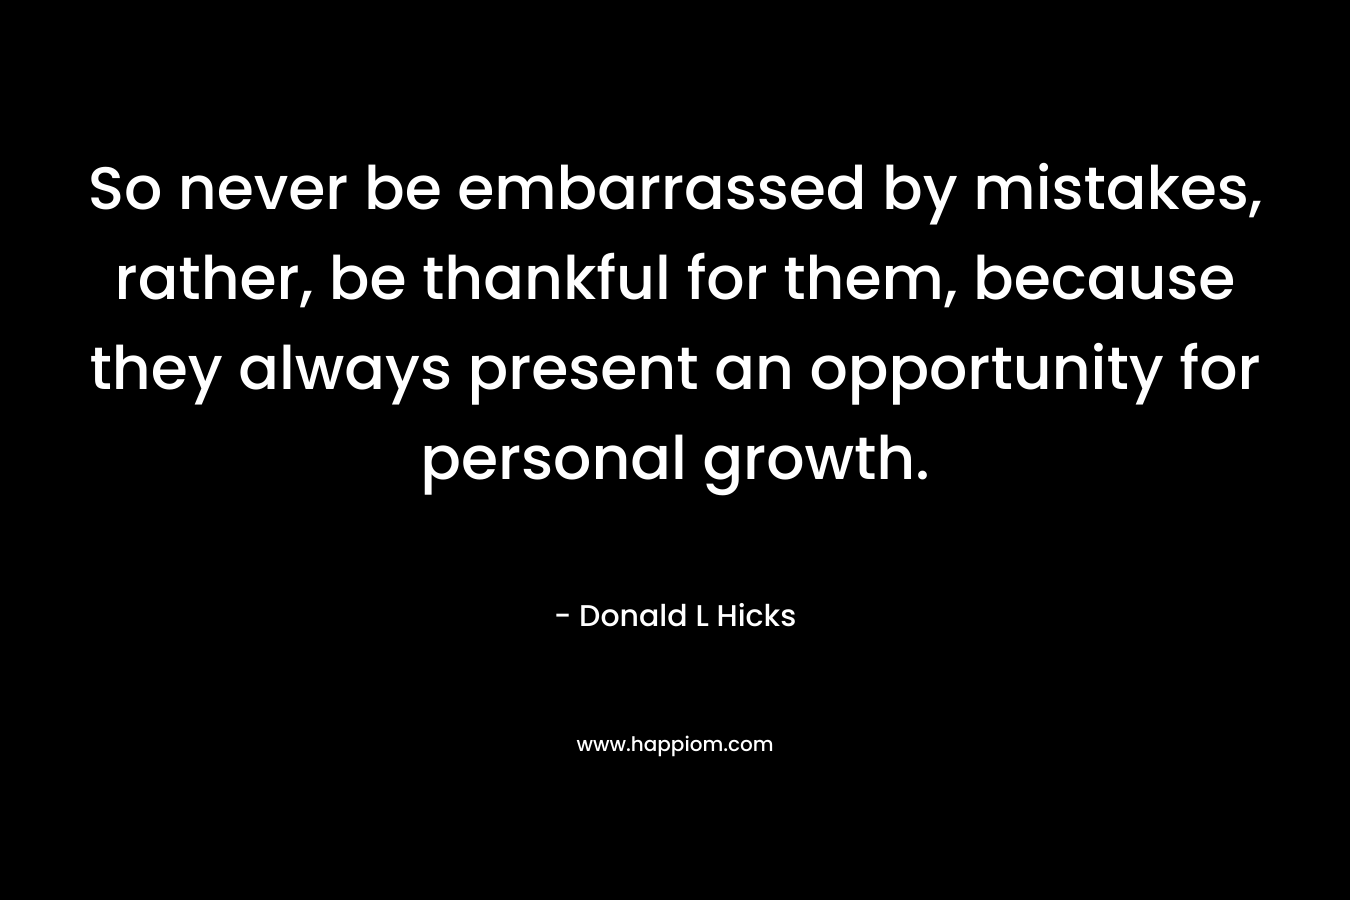 So never be embarrassed by mistakes, rather, be thankful for them, because they always present an opportunity for personal growth. – Donald L Hicks